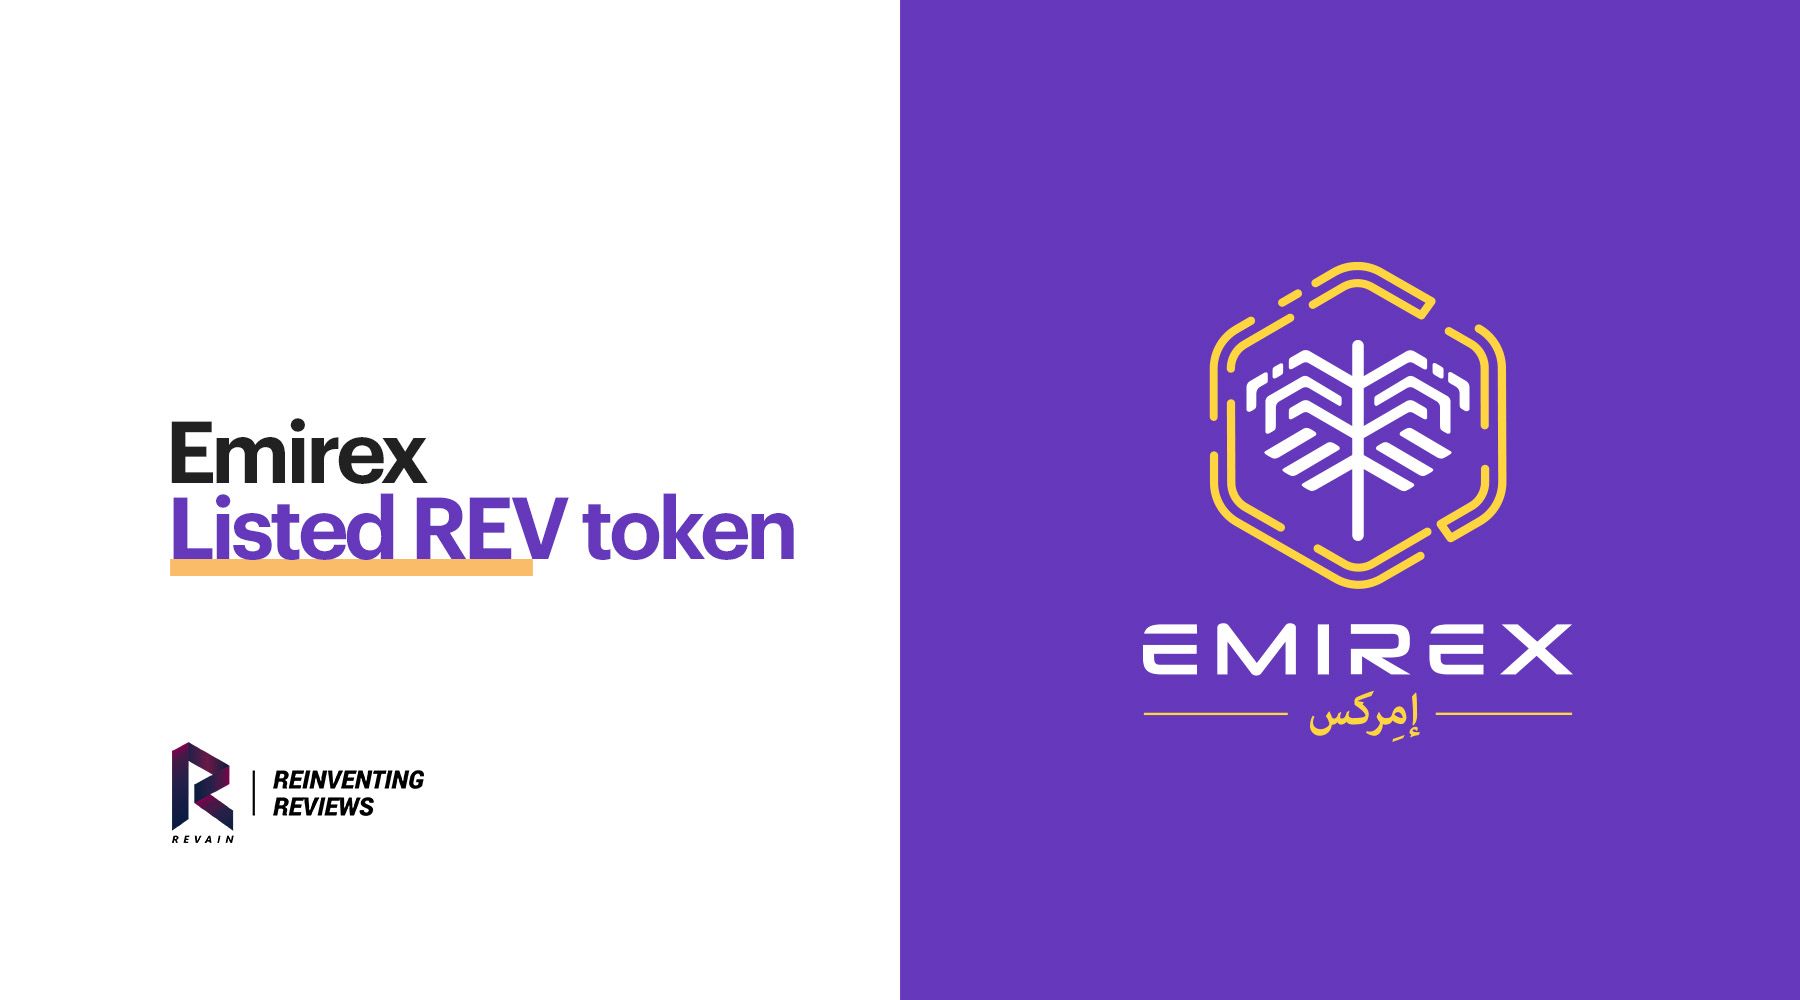 Article Revain is listed on the Emirex exchange